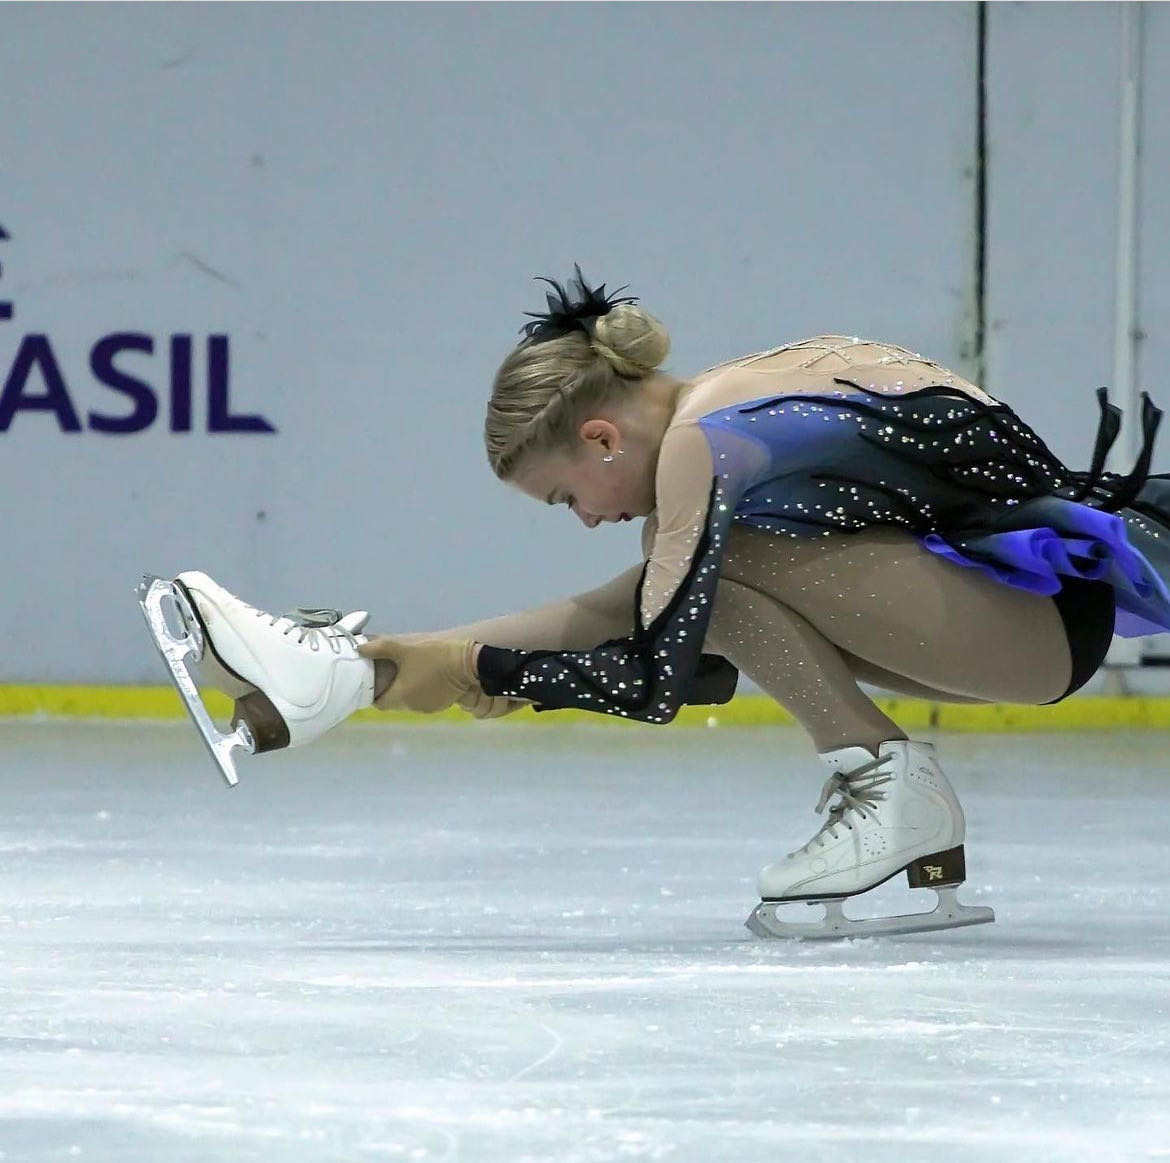 Gabriella Koch’s passion on the ice: Skating journey